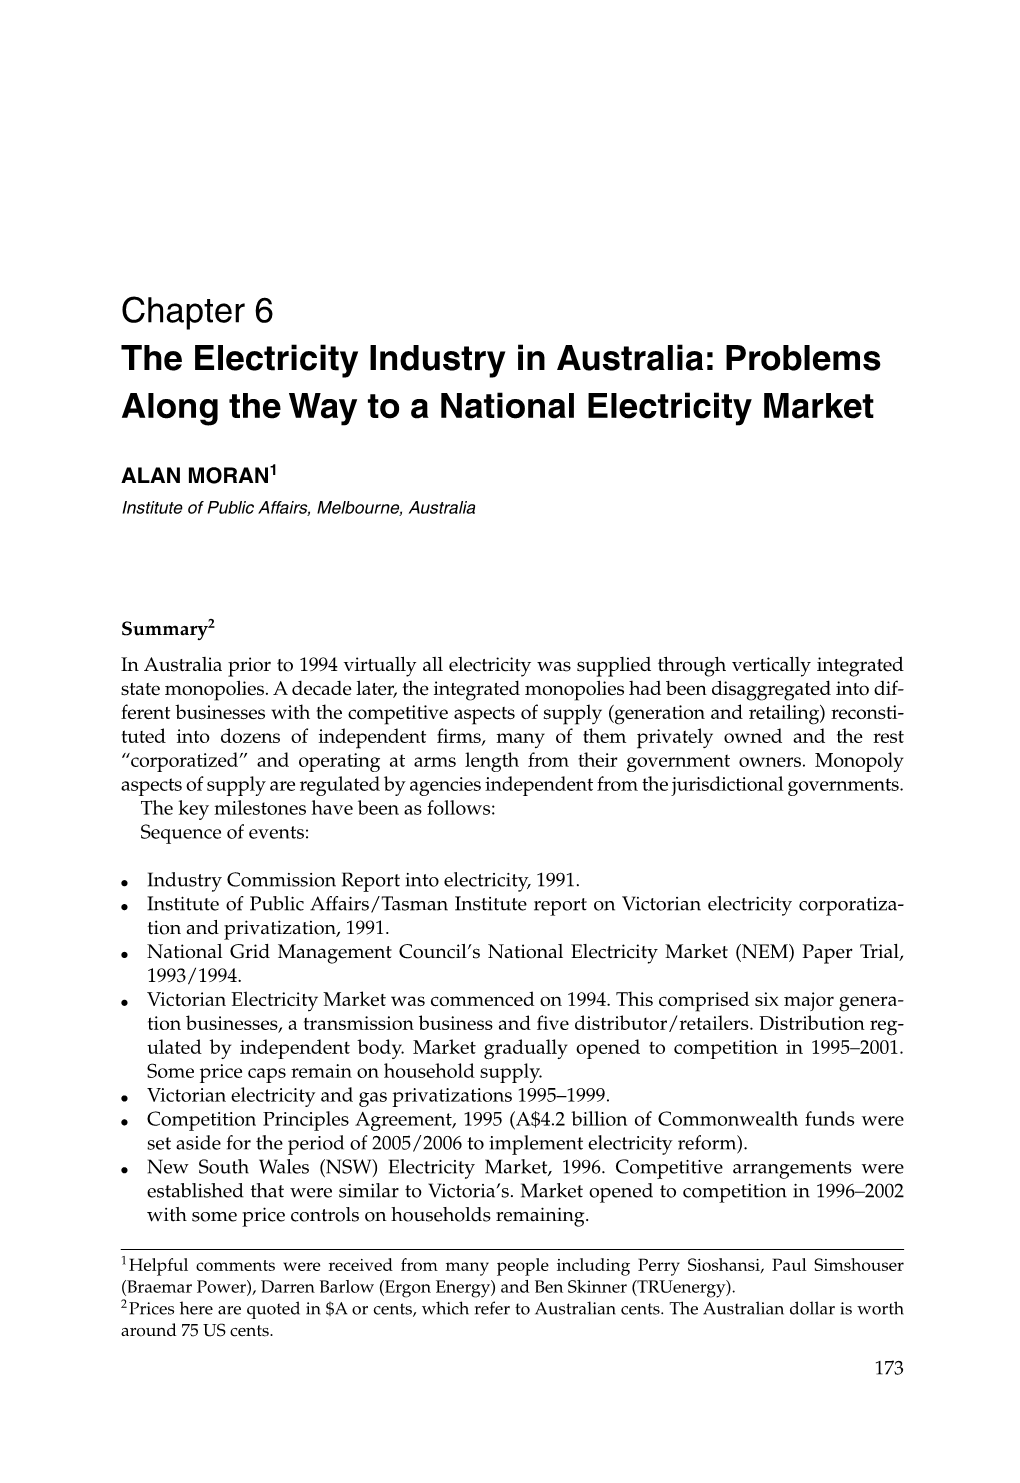 Problems Along the Way to a National Electricity Market